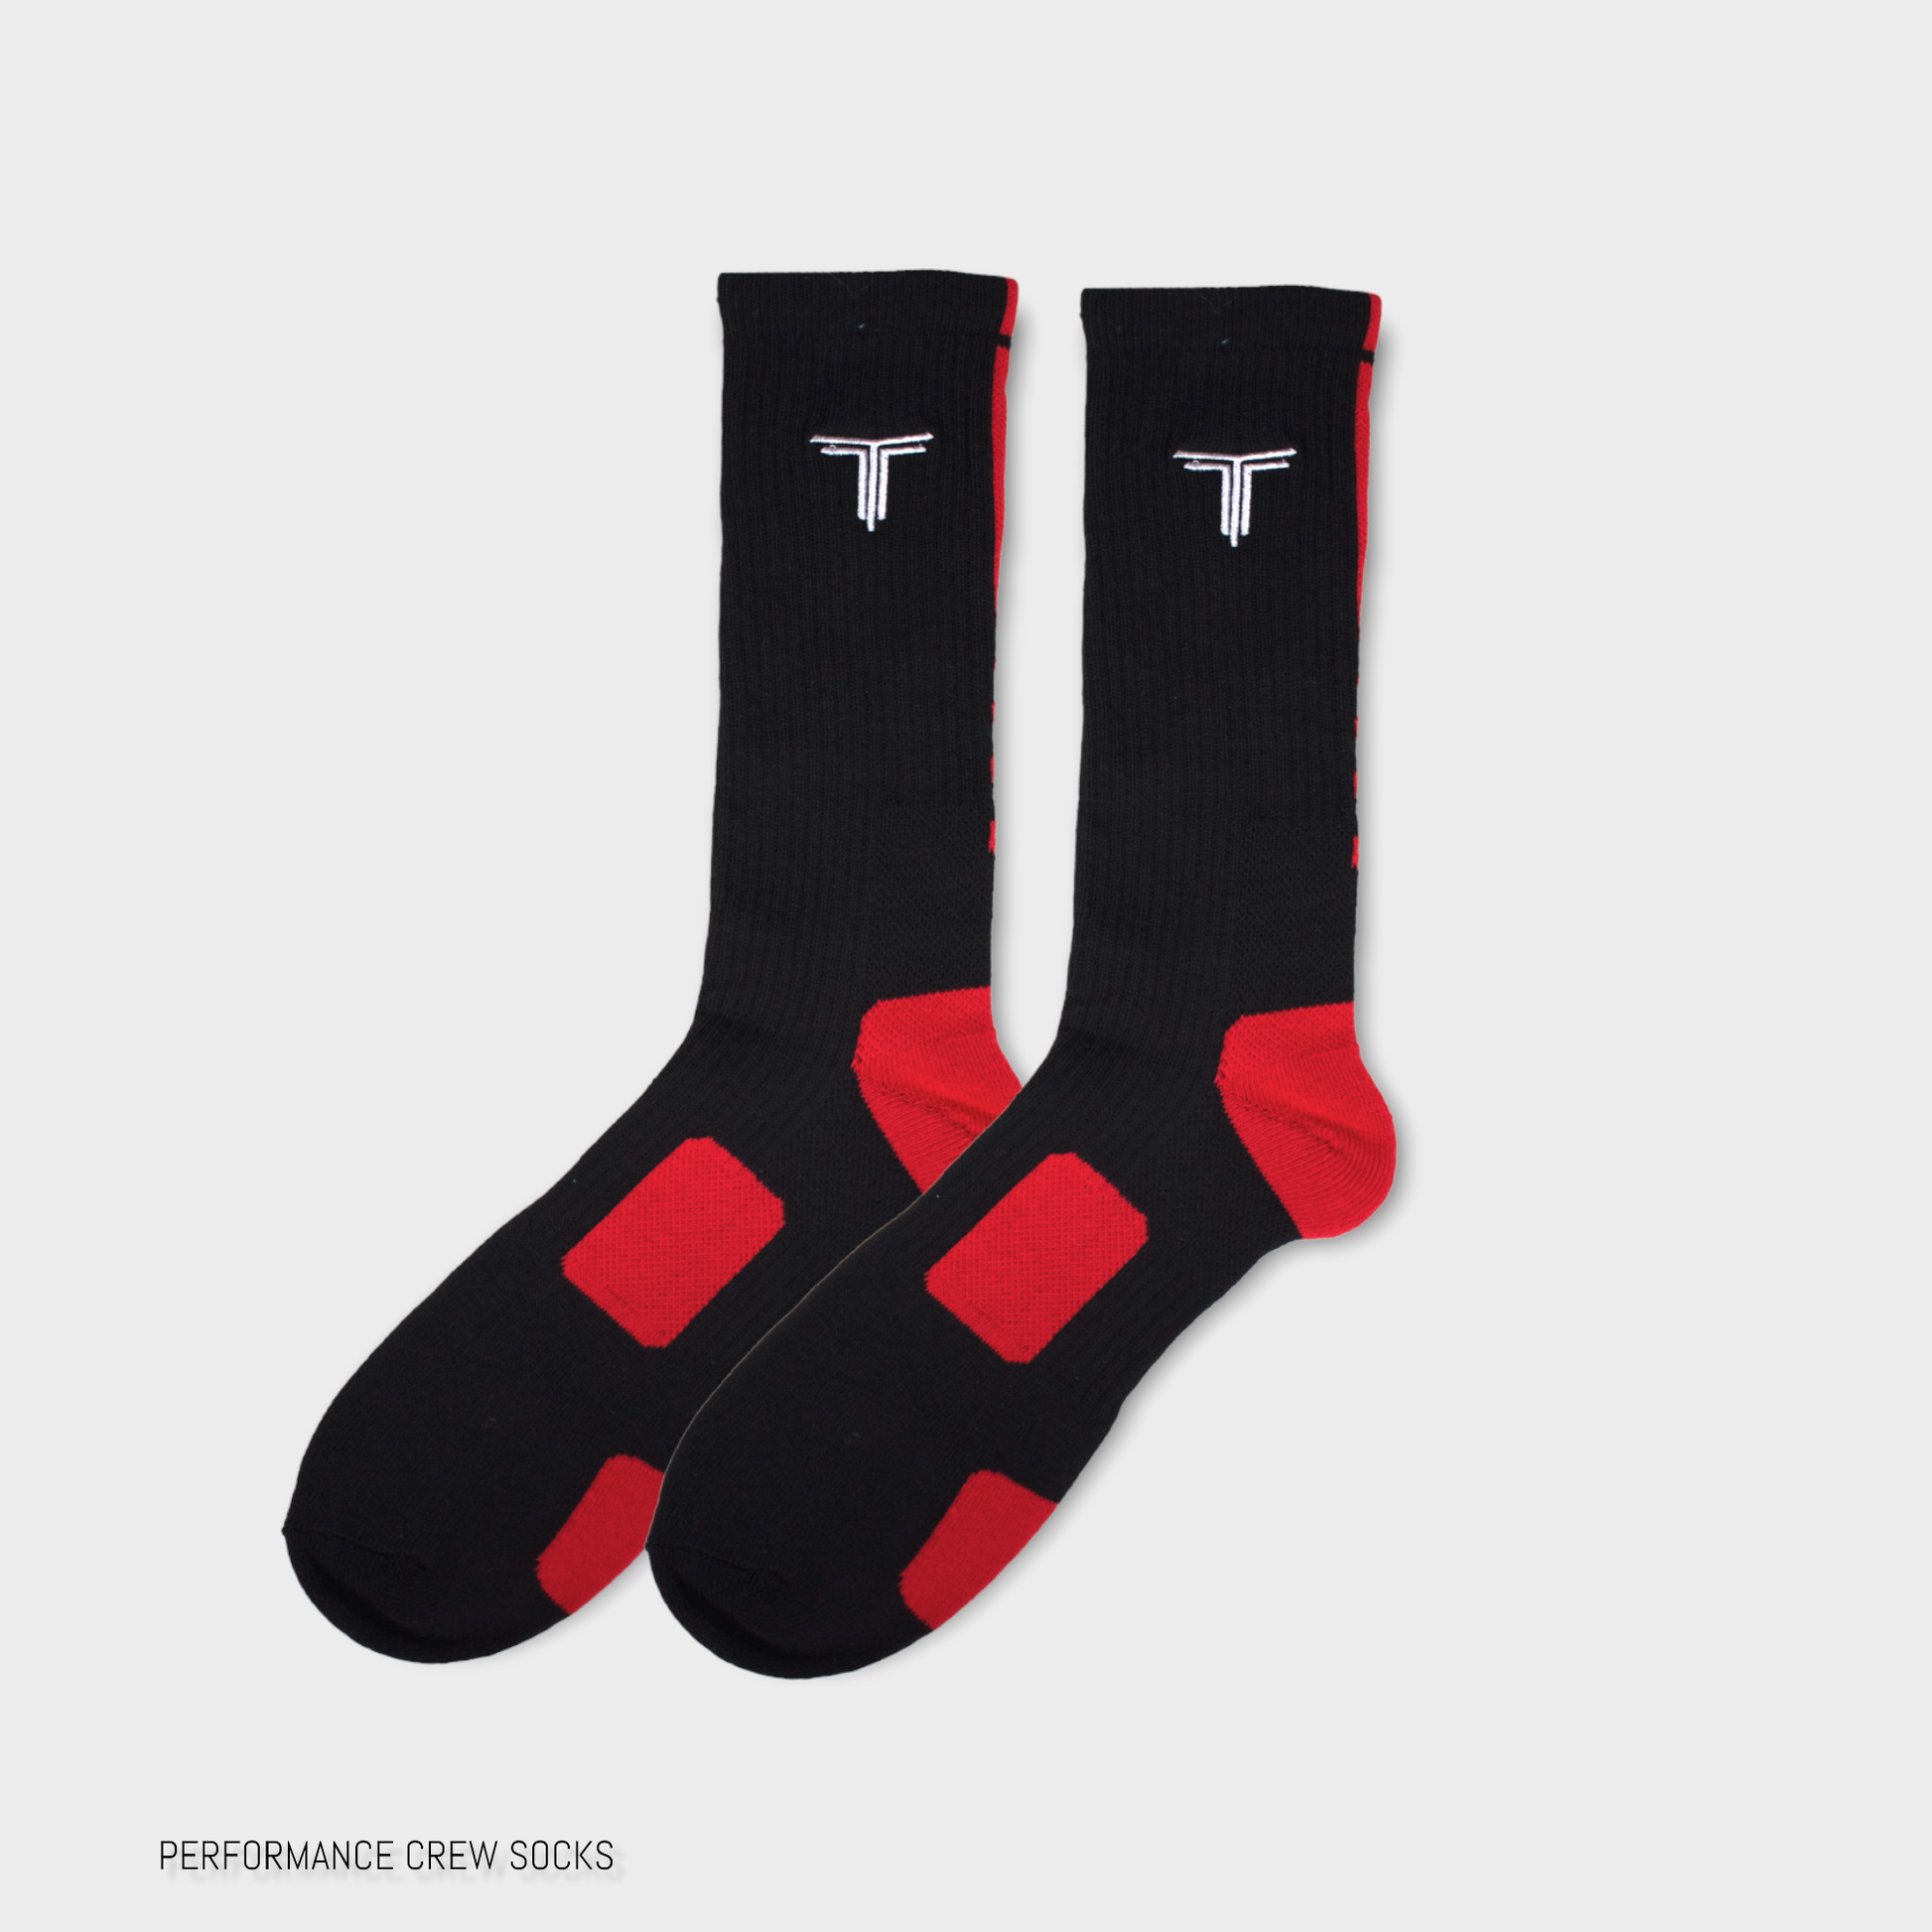 PERFORMANCE ATHLETIC CREW SOCKS - WHITE/RED - Lineage Athletics